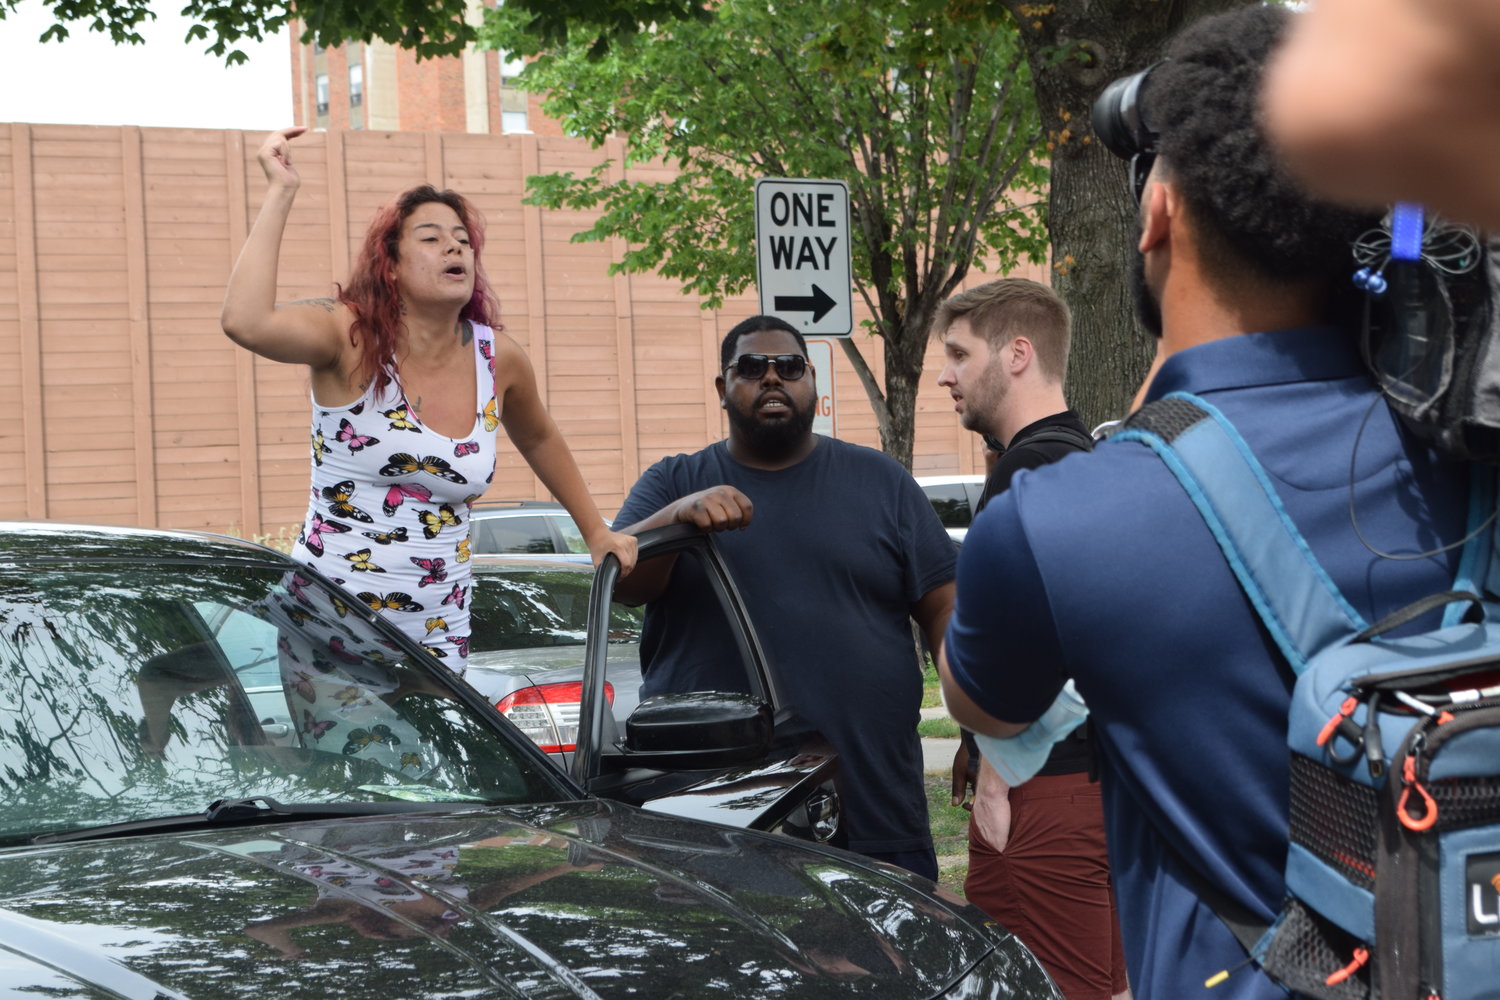 Arabella Foss-Yarbrough, who reported that bullets had been shot into her apartment, expresses her anger to the crowd. (Photo by Jill Boogren)